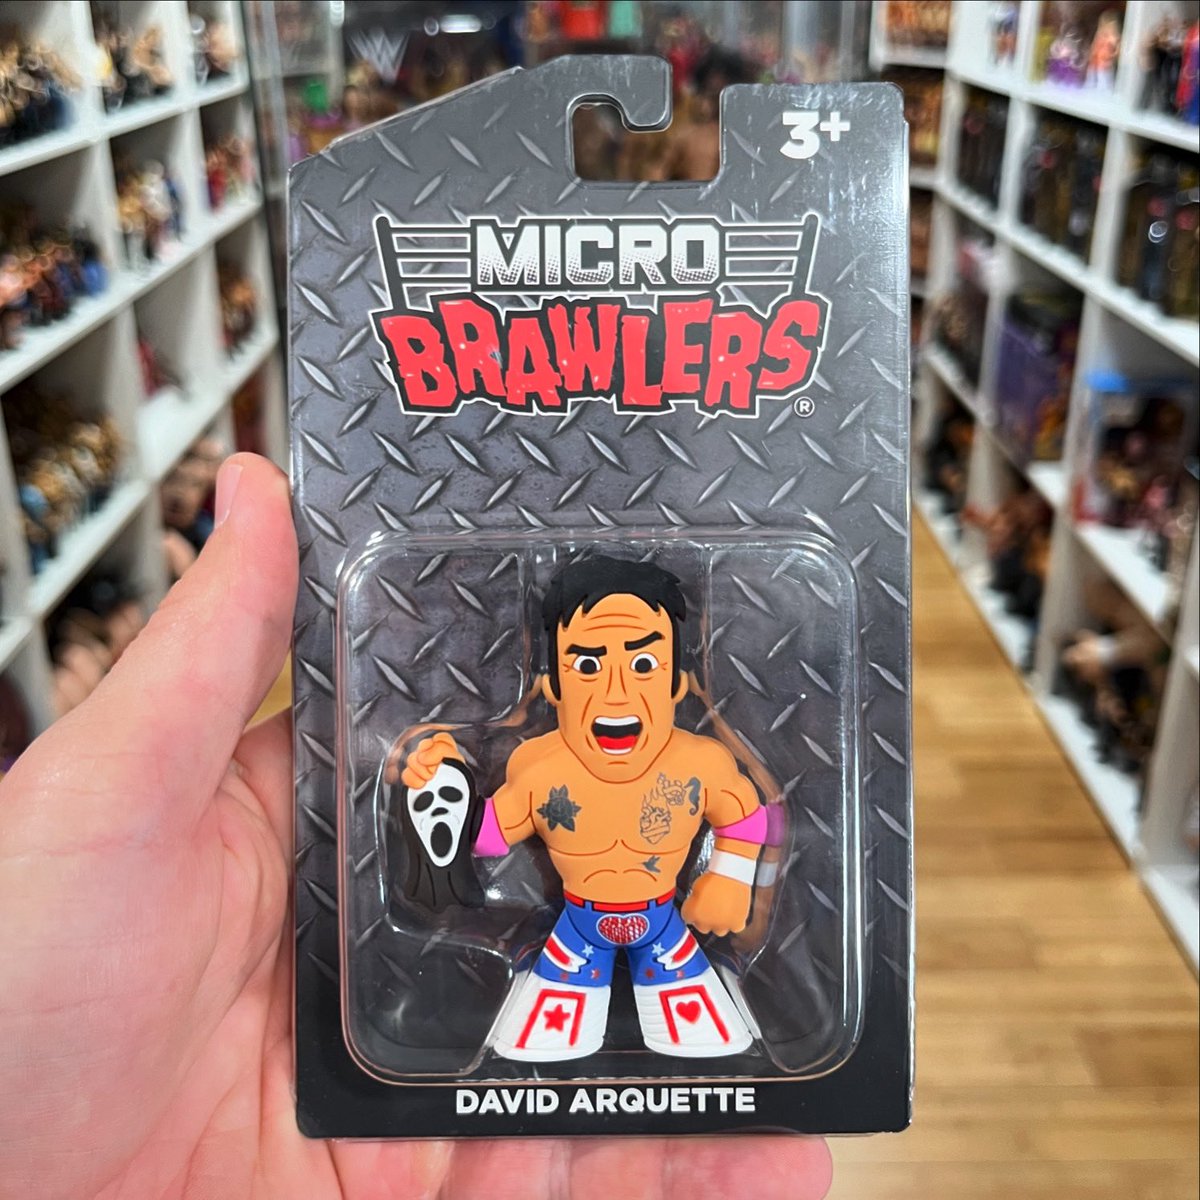 Easily my favorite Micro Brawler up to this point… Former WCW champion @davidarquette finally has a wrestling figure!

Join Whatnot @ WHATHEEL.com & get $15 to use!

#figheel #actionfigures #toycommunity #toycollector #wrestlingfigures #wwe #aew #njpw #tna